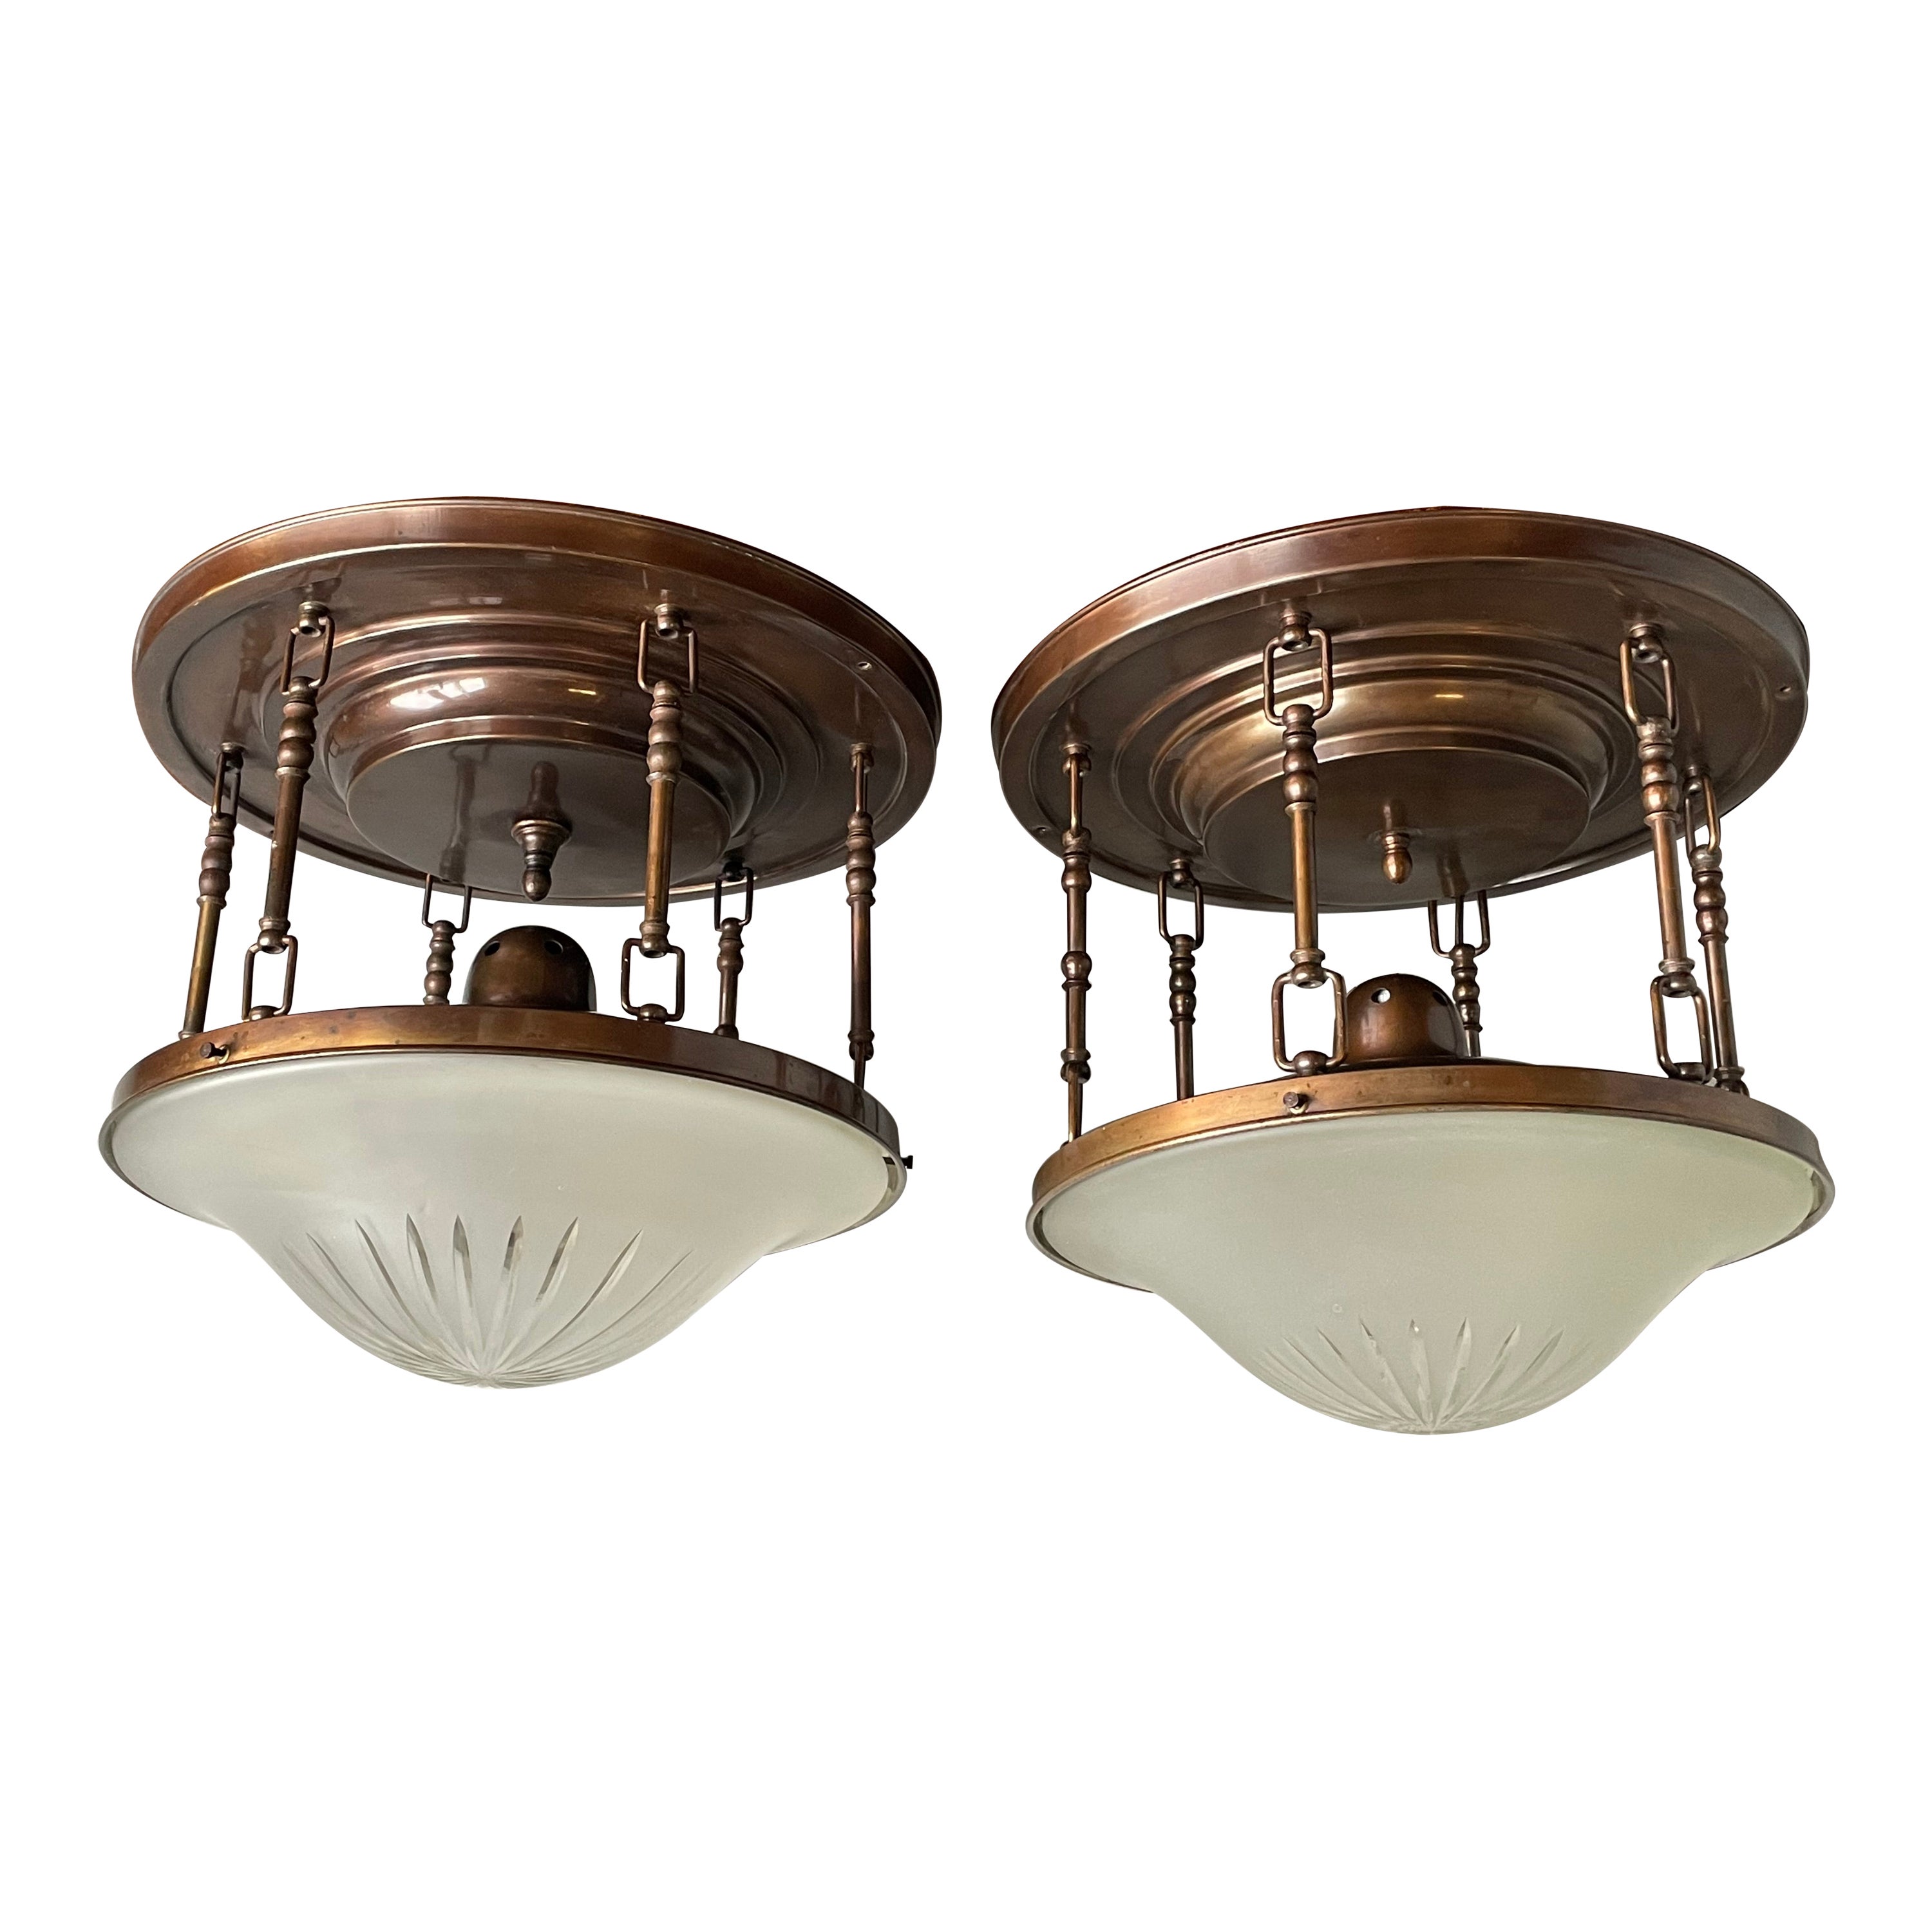 Near Pair of Arts & Crafts, Brass and Glass Shades Flush Mounts / Ceiling Lights en vente